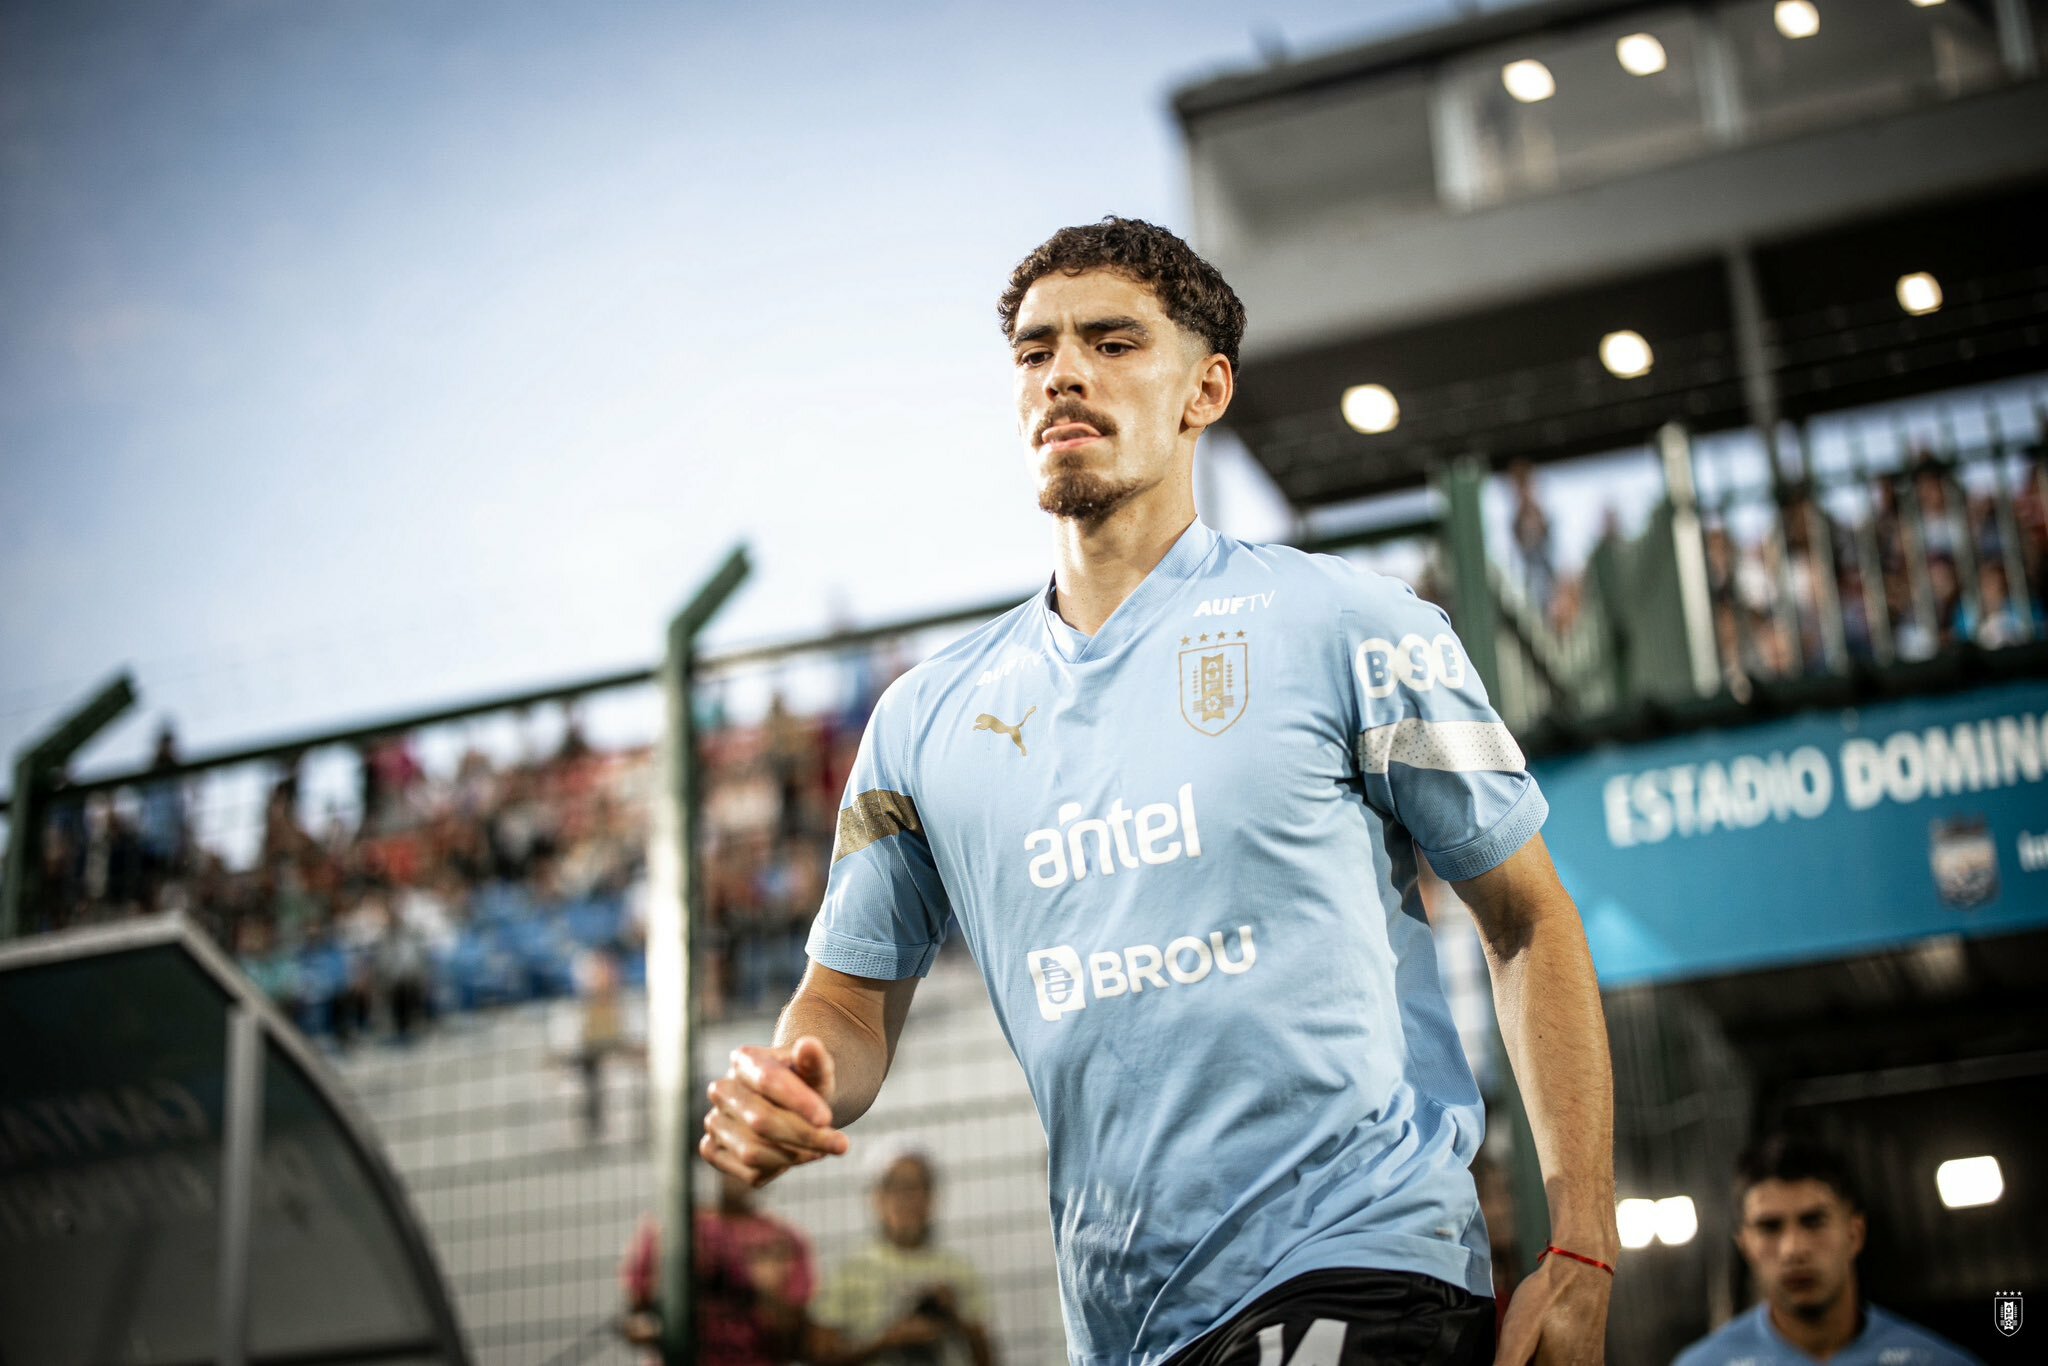 Marichal makes his debut for Uruguay